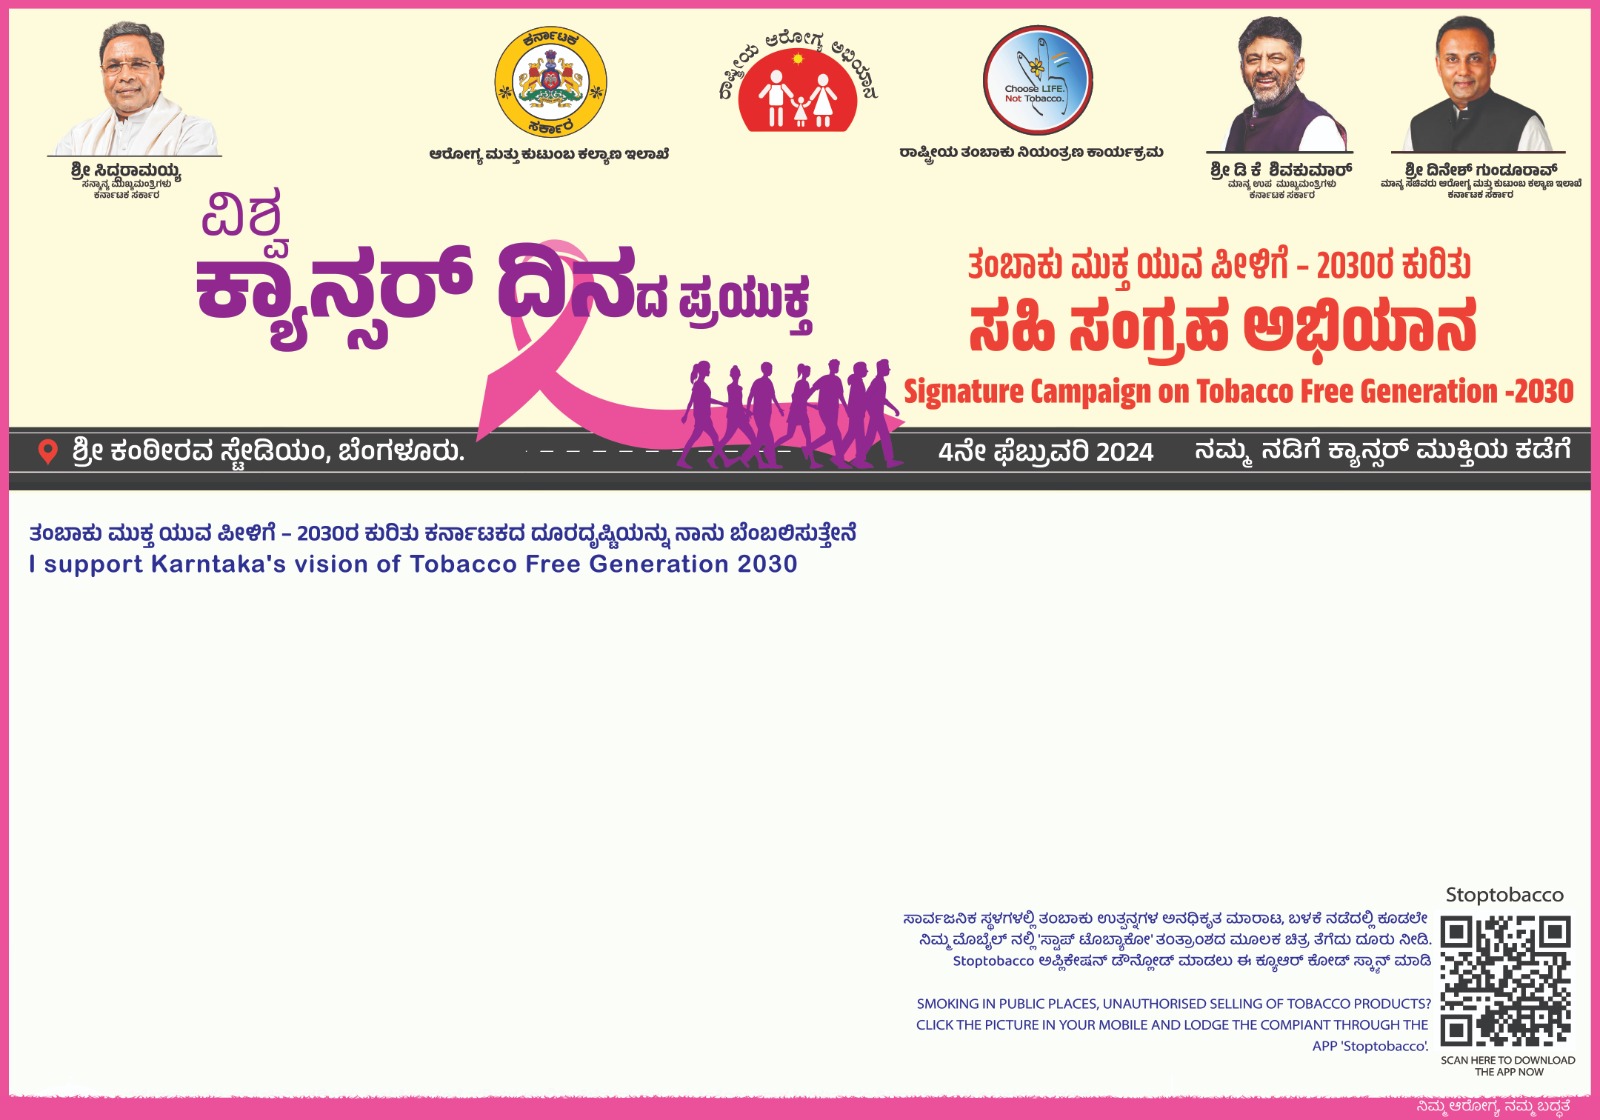 WORLD CANCER DAY SIGNATURE CAMPAIGN